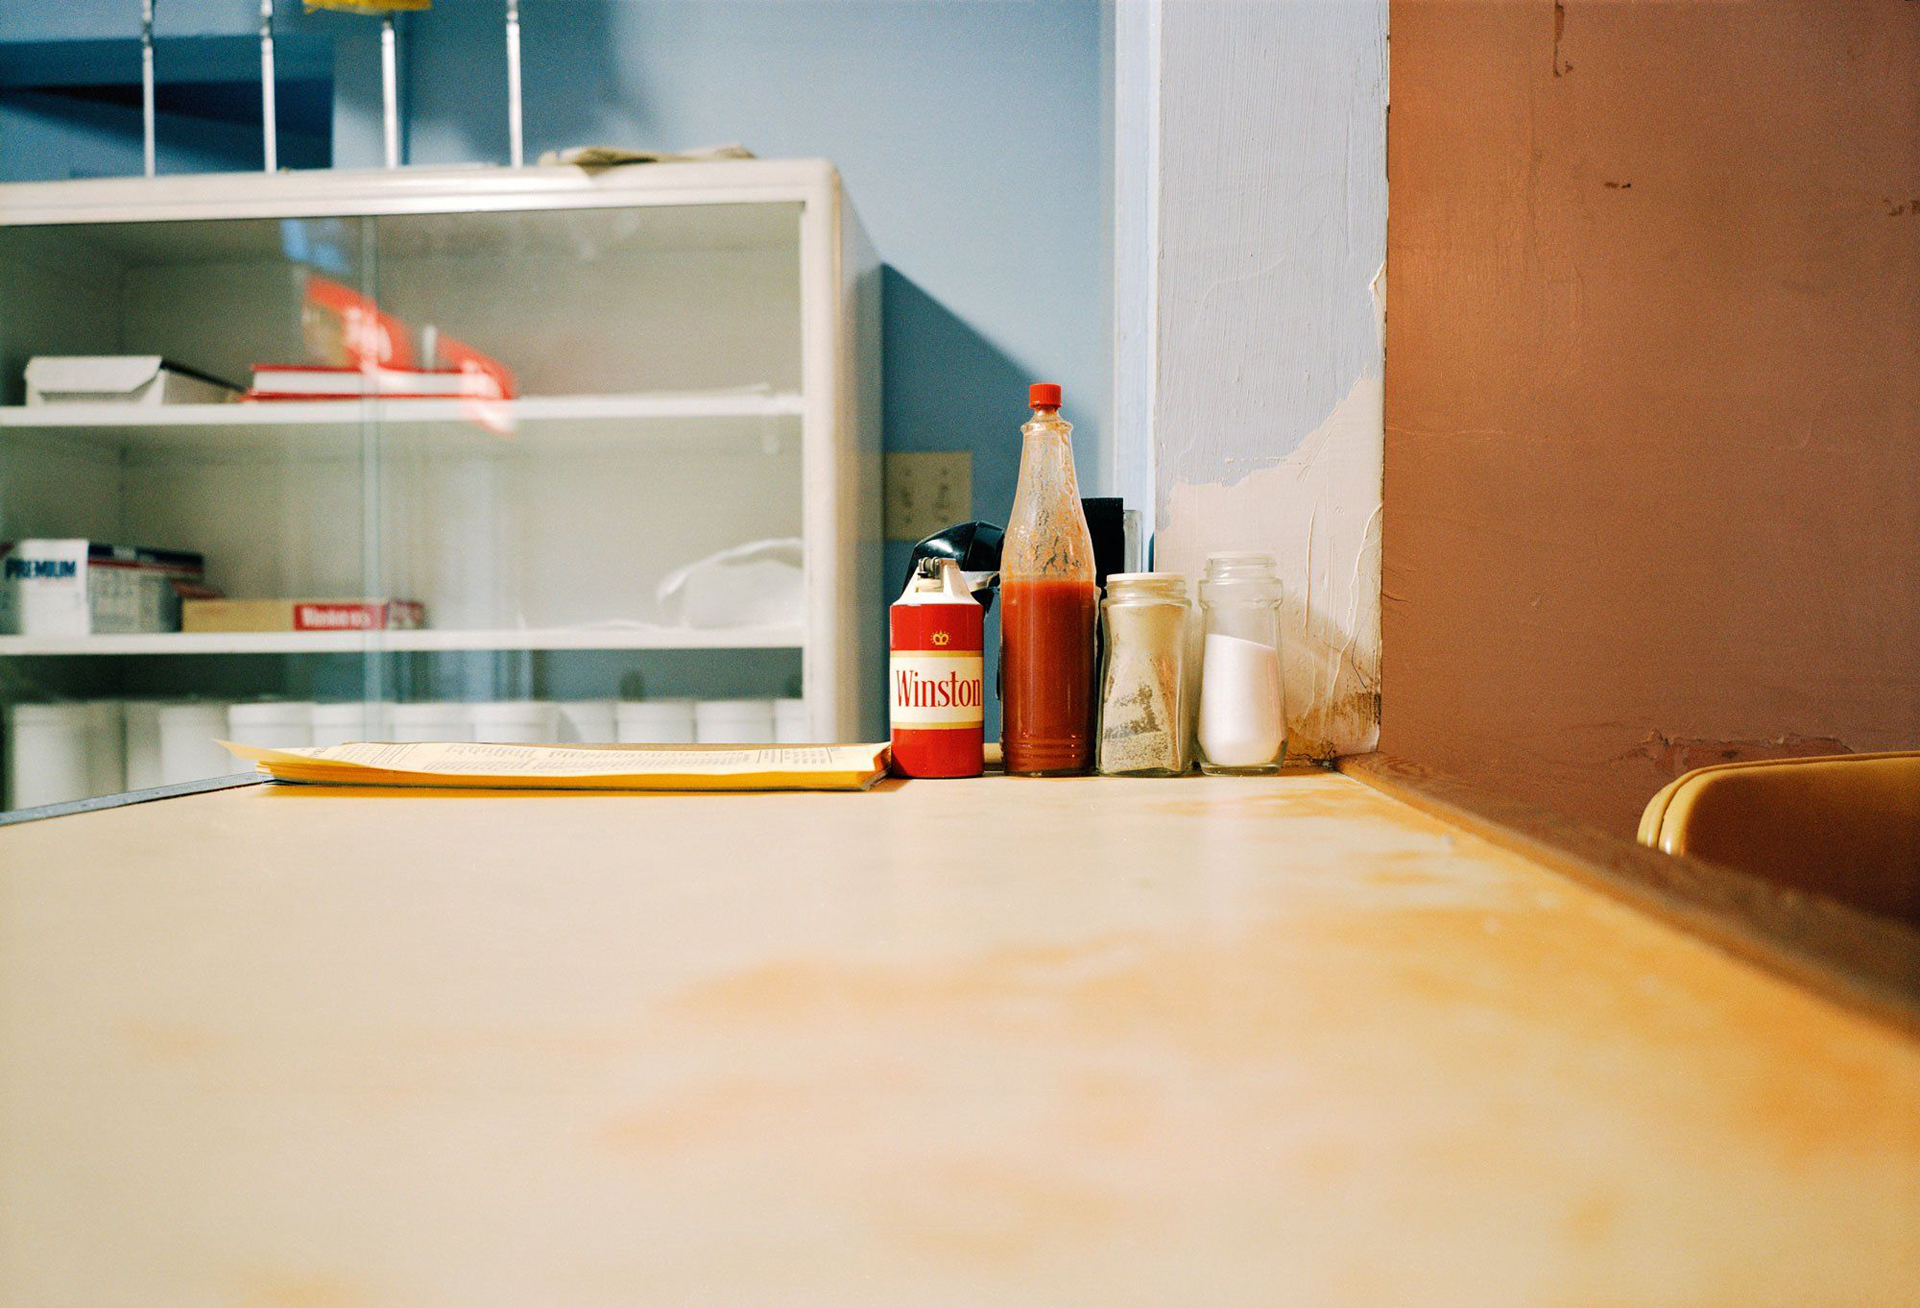 eggleston-1983-1986-s-TheDemocraticForest-ketchup